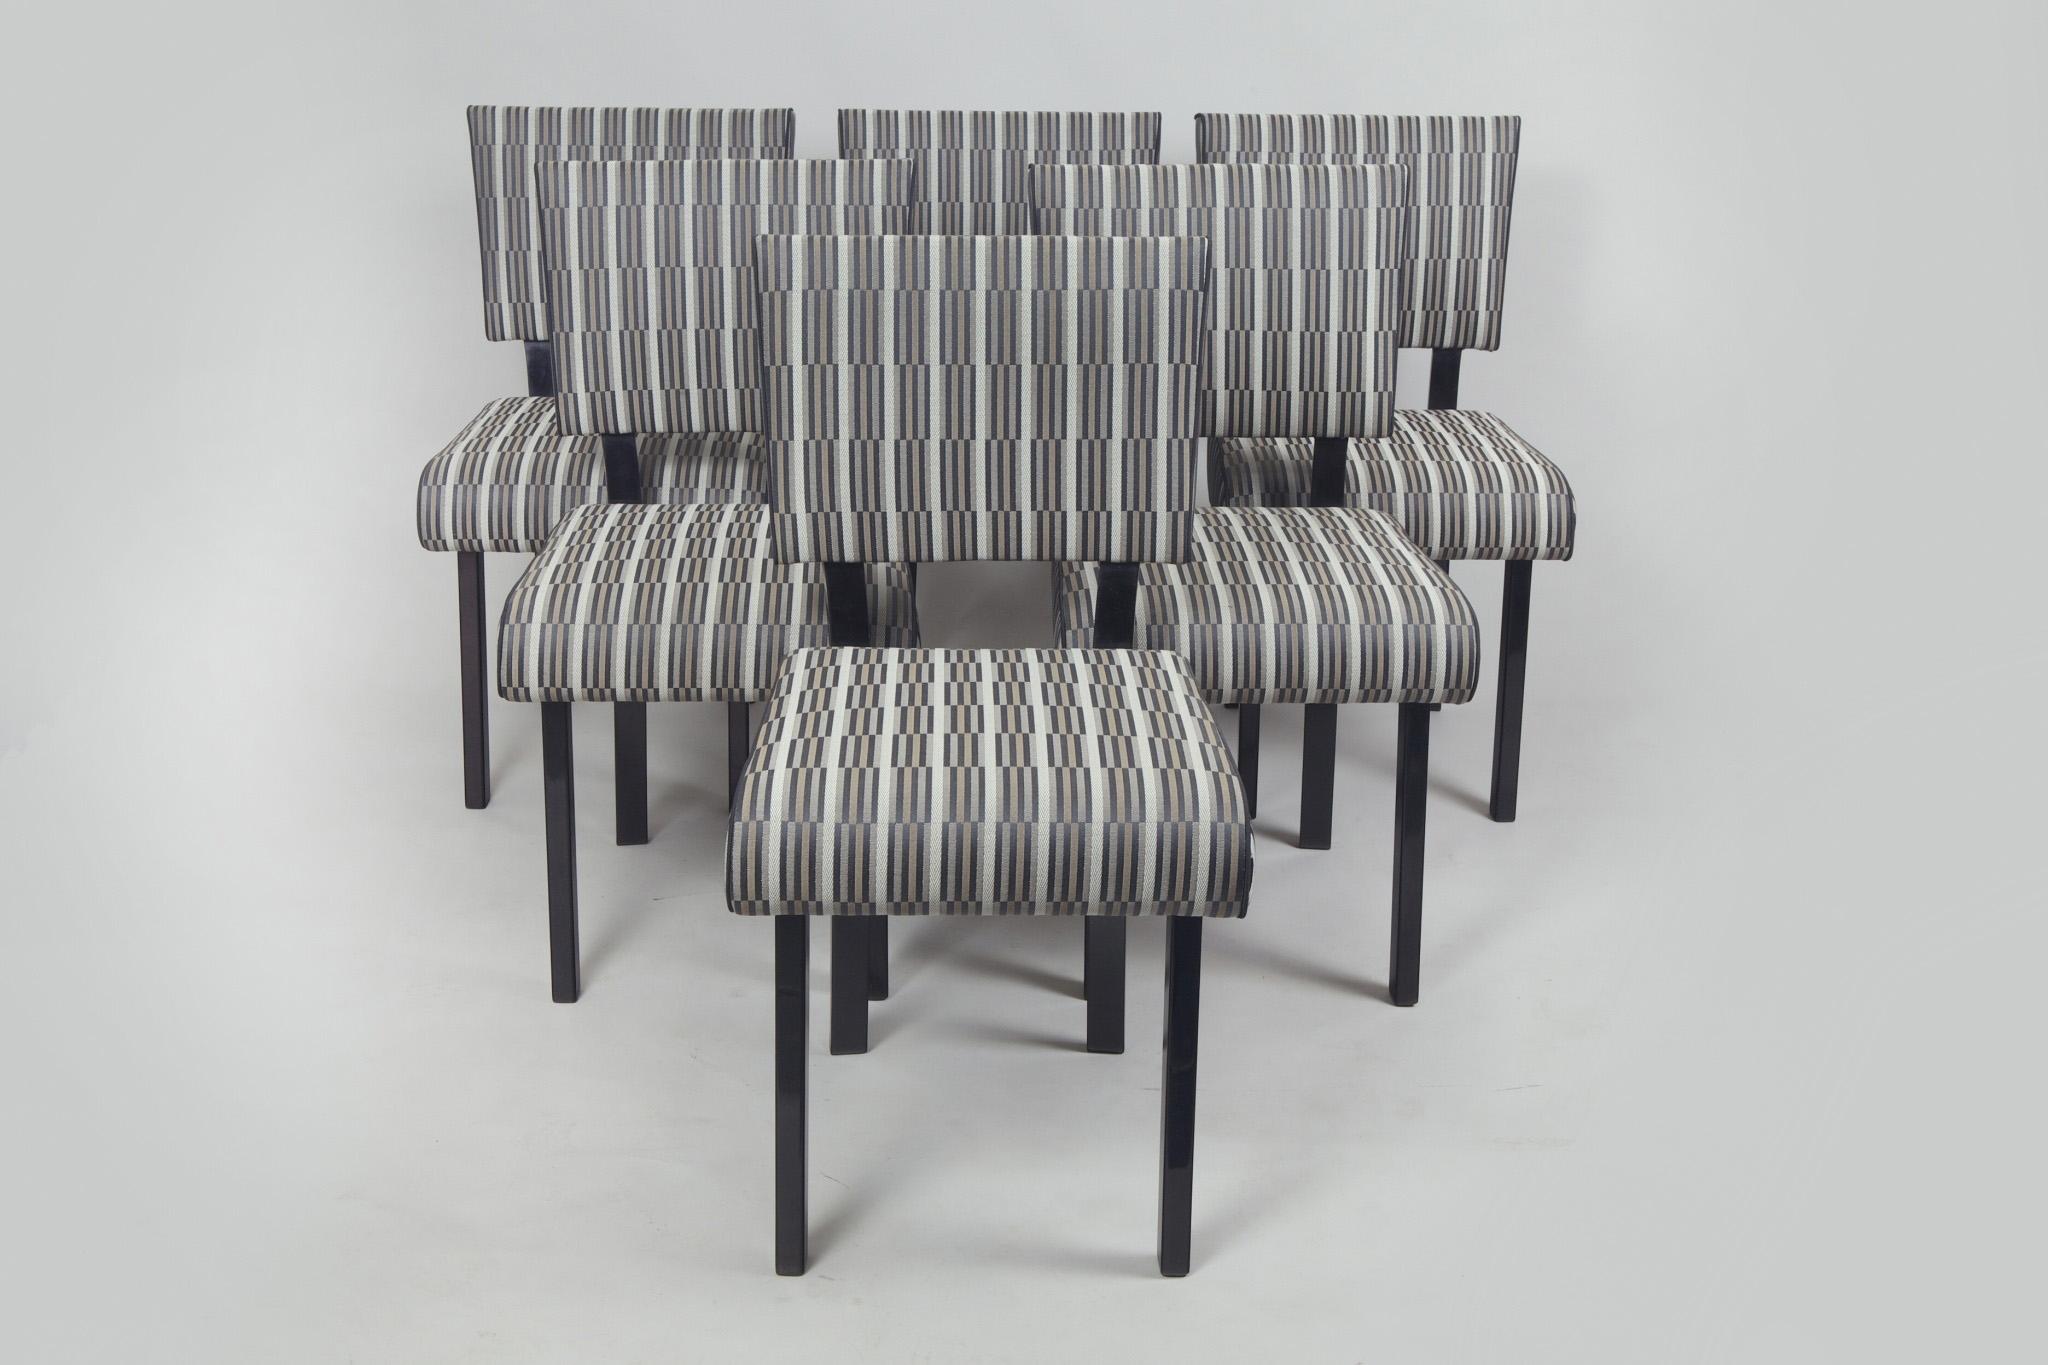 Fabric Set of Six Art Deco Chairs Made in 1930s Czechia, Fully Refurbished For Sale